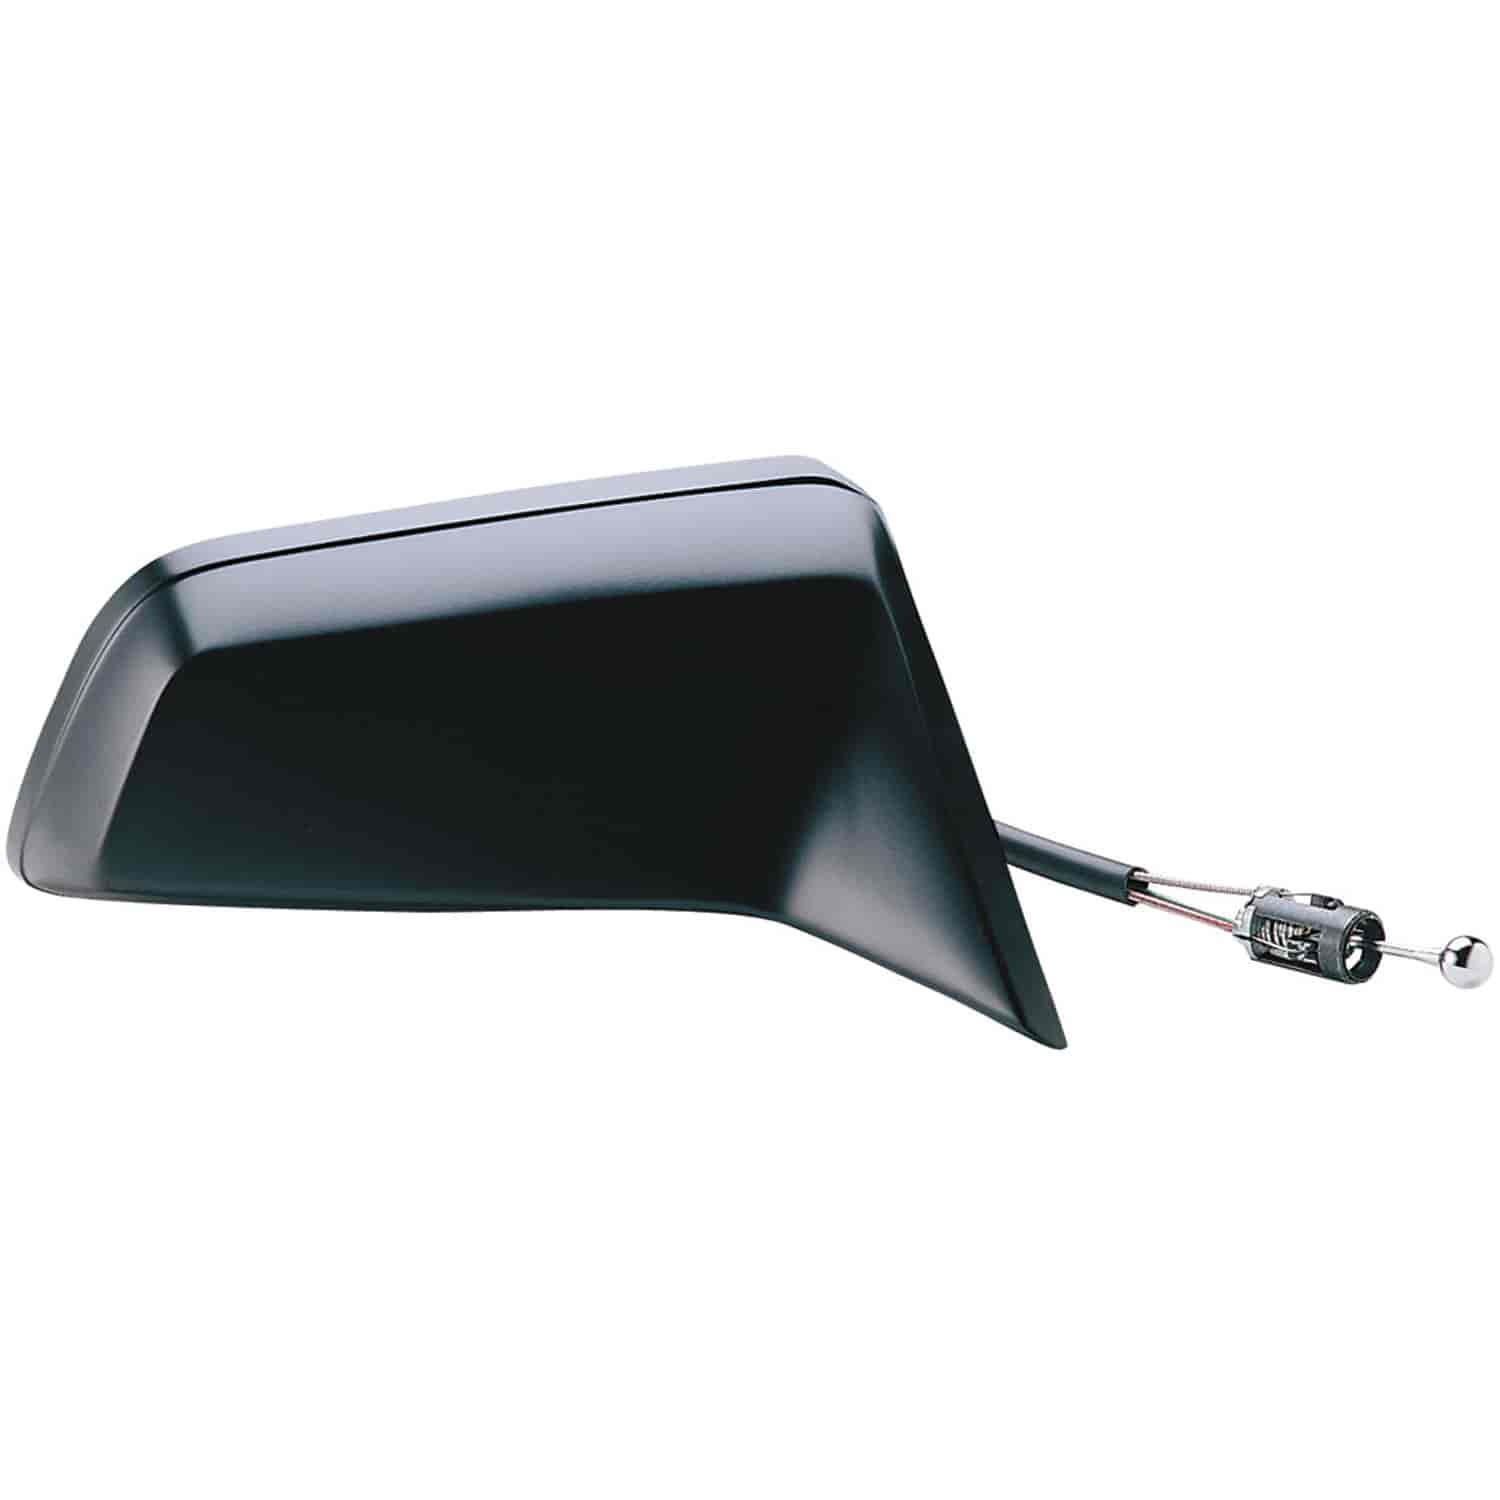 OEM Style Replacement mirror for 82-96 Buick Century 92-90 Chevy Celebrity Sport 93-94 Olds. Cutlass